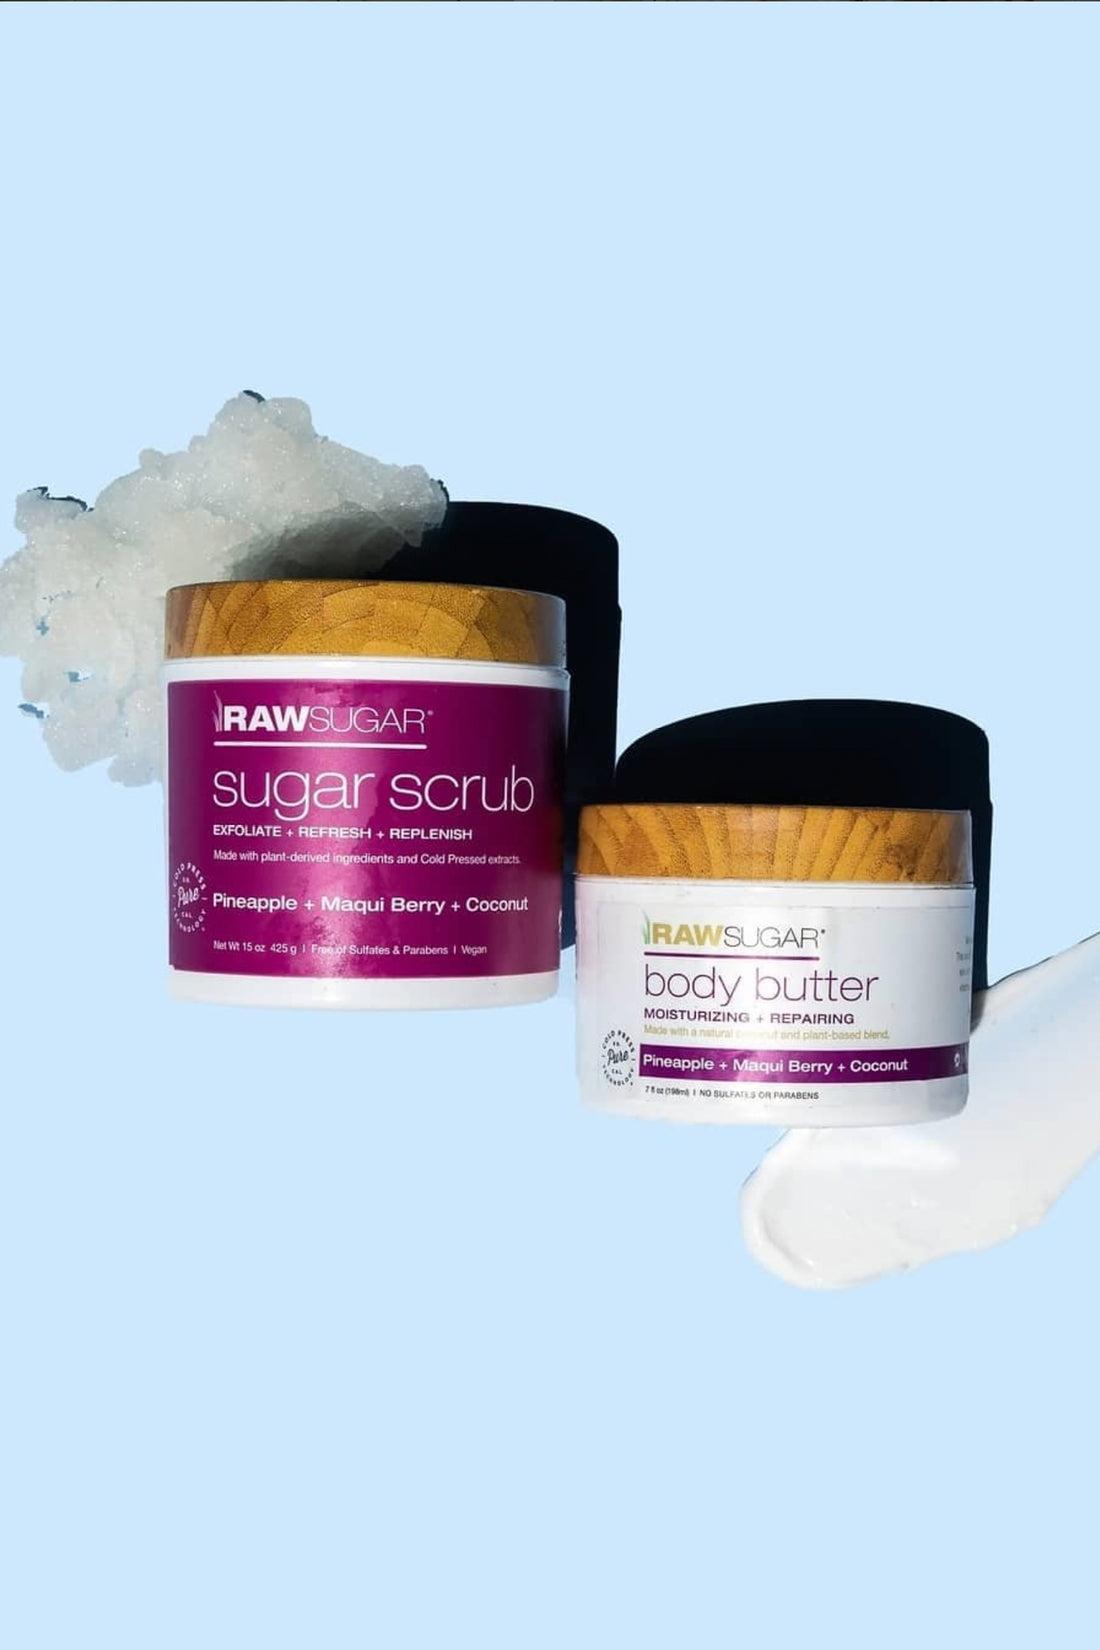 Raw Sugar Sugar Scrub and Body Butter next to each other with goop on light blue background